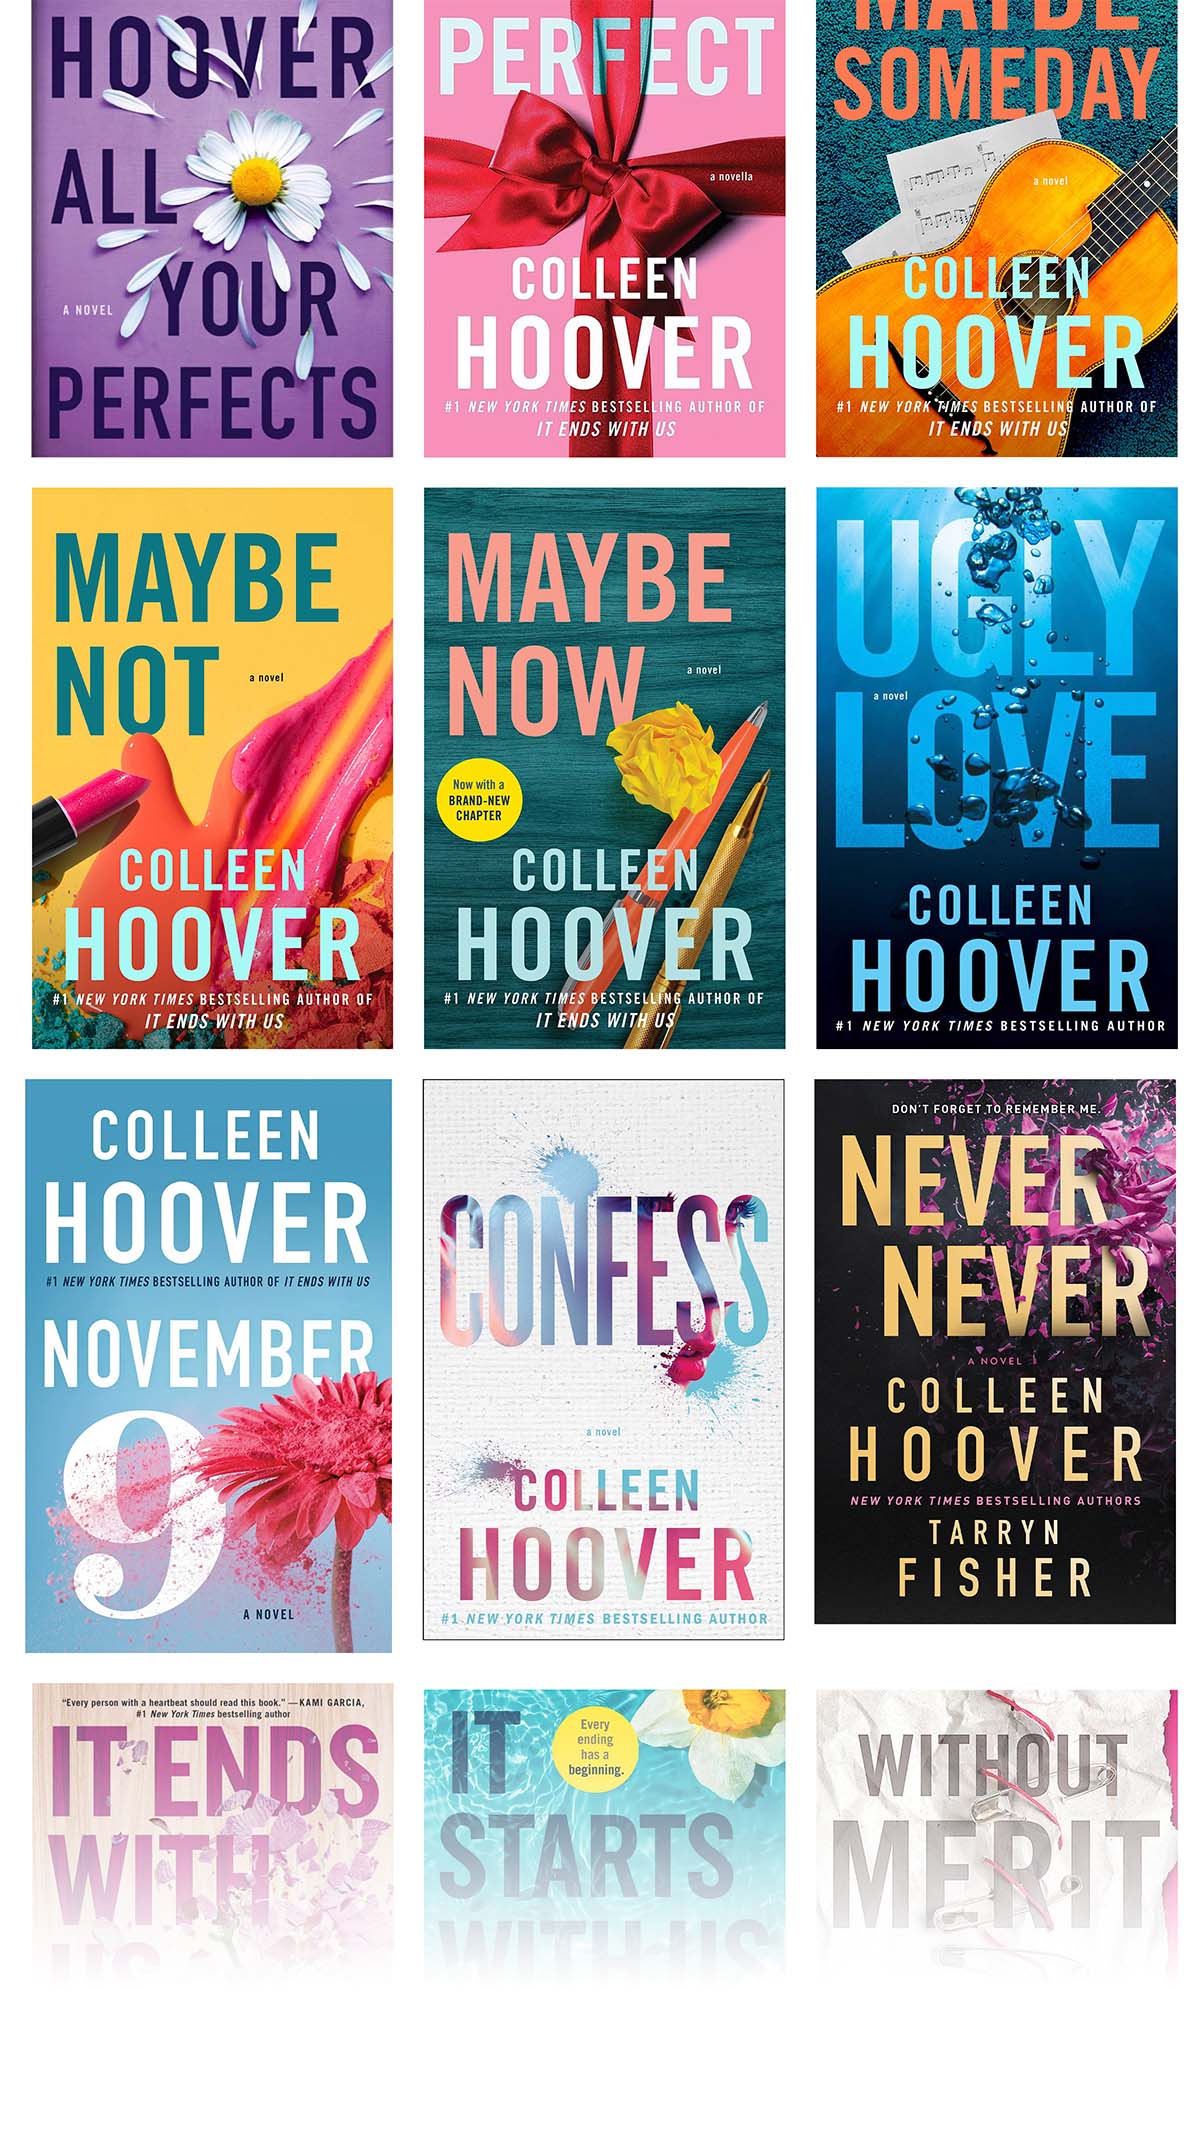 Which Colleen Hoover to read first? : r/ColleenHoover